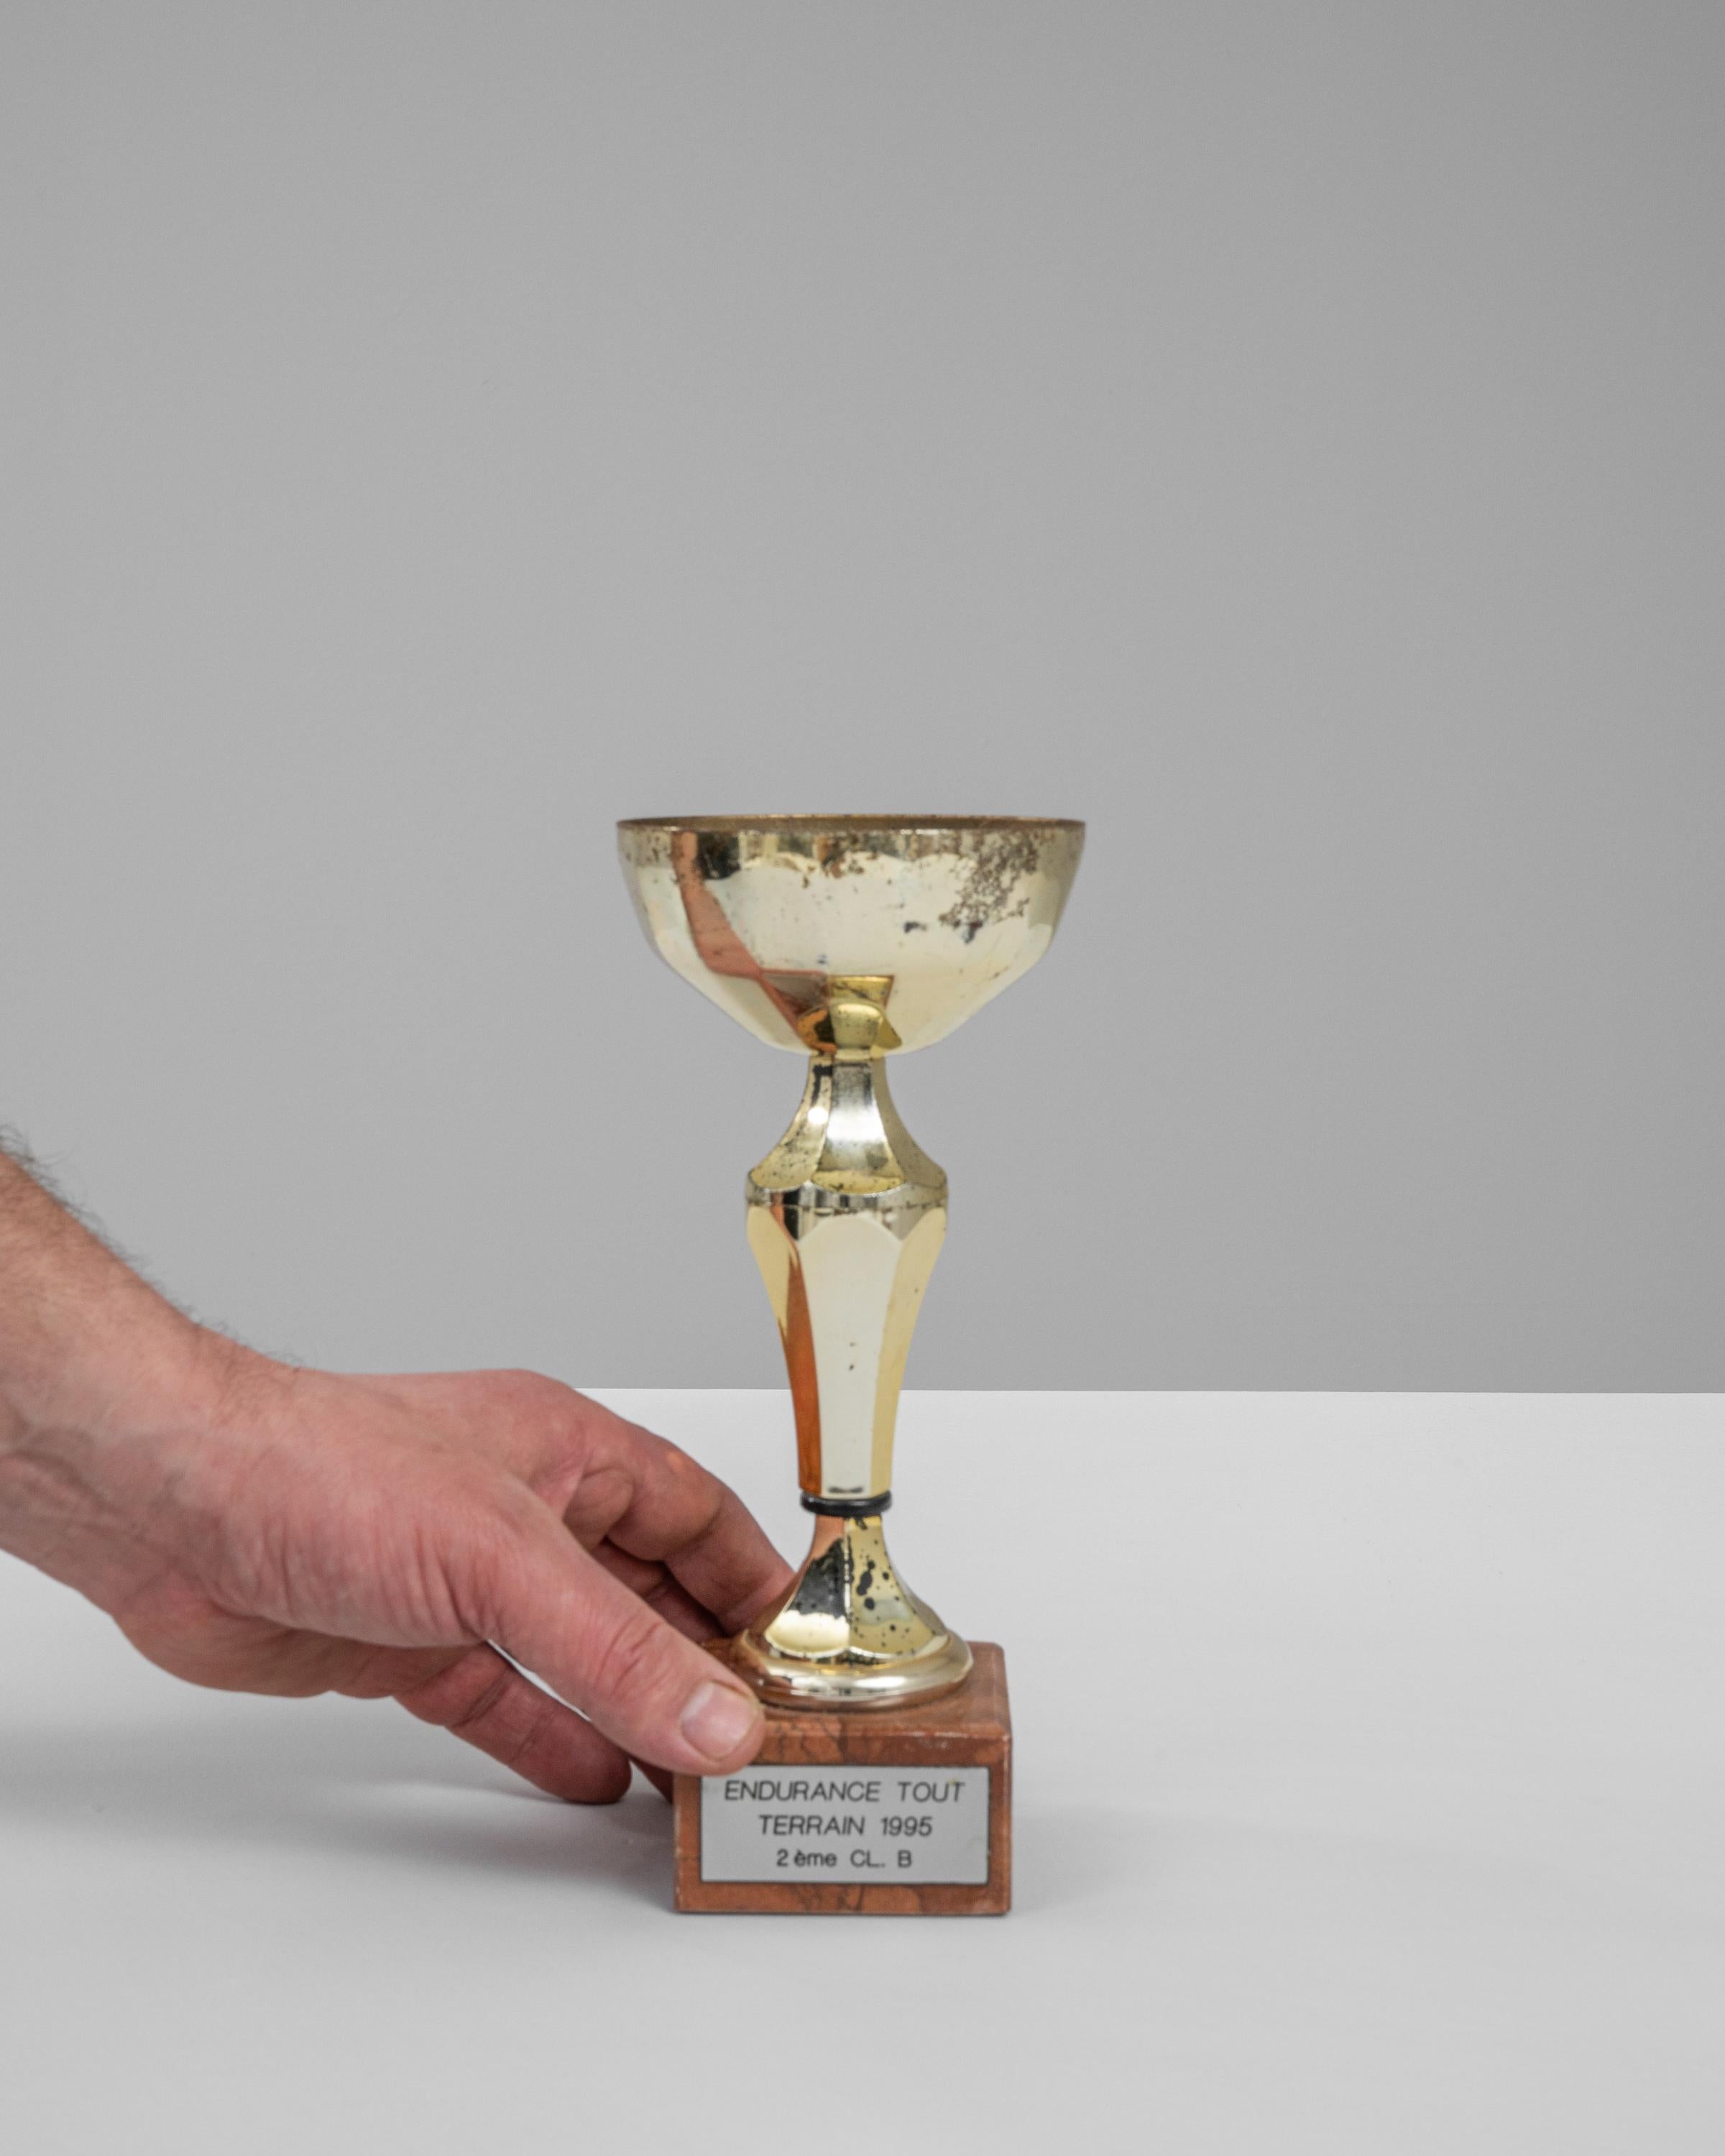 This 1990s Belgian Metal & Marble Goblet is a symbol of triumph and the indomitable spirit of competition. Awarded for 'Endurance Tout Terrain' in 1995, this goblet is a testament to the resilience and fortitude required in the demanding sport of